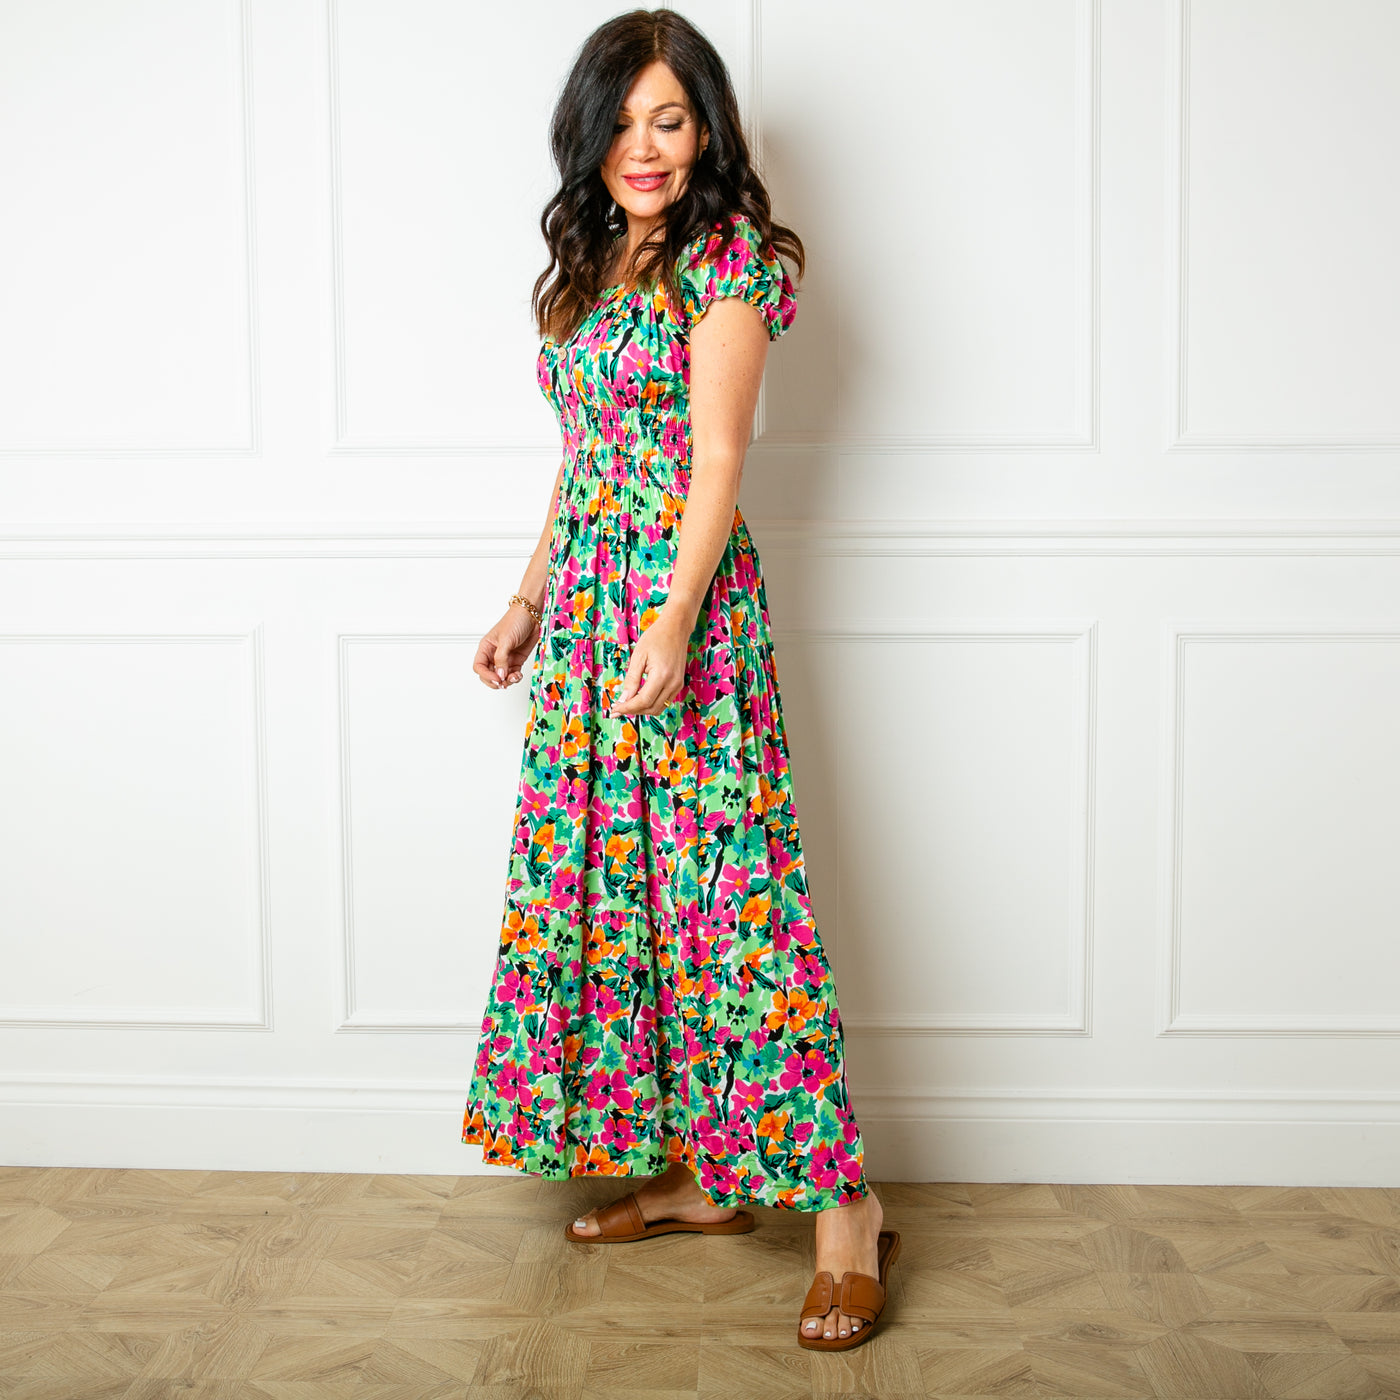 The floral green Printed Button Maxi Dress with a maxi tiered skirt in a fun summery pattern